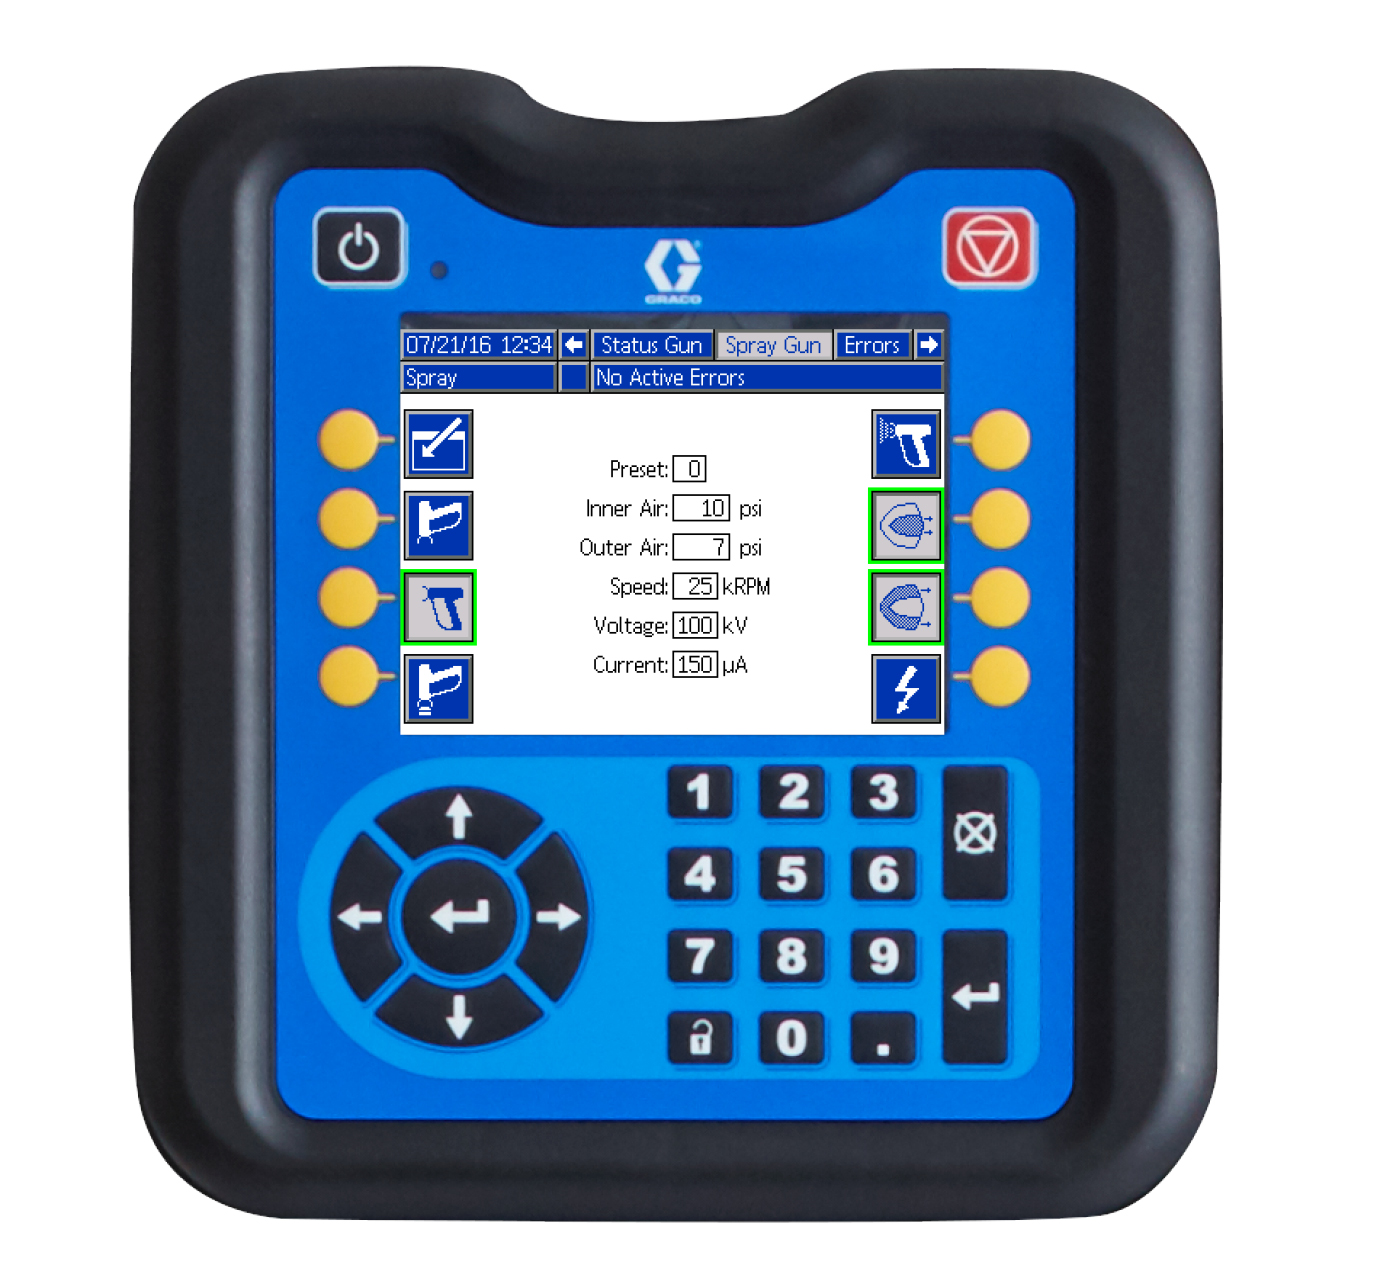 The control panel for a Graco ProBell